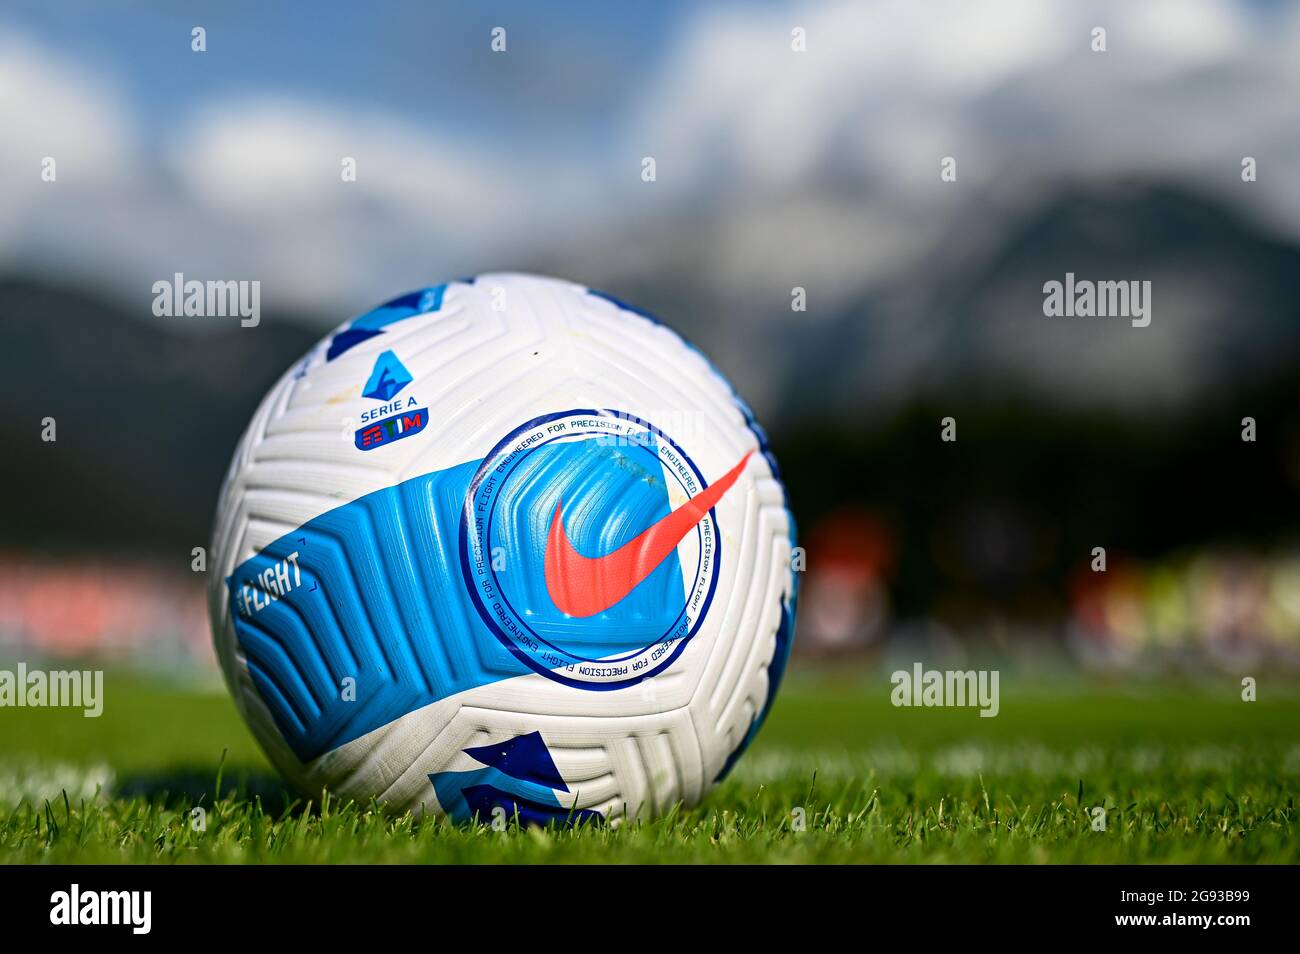 Auronzo di Cadore, Italy. 23 July 2021. Official Serie A match ball 'Nike  Flight' is seen prior to the pre-season friendly football match between SS  Lazio and US Triestina. SS Lazion won